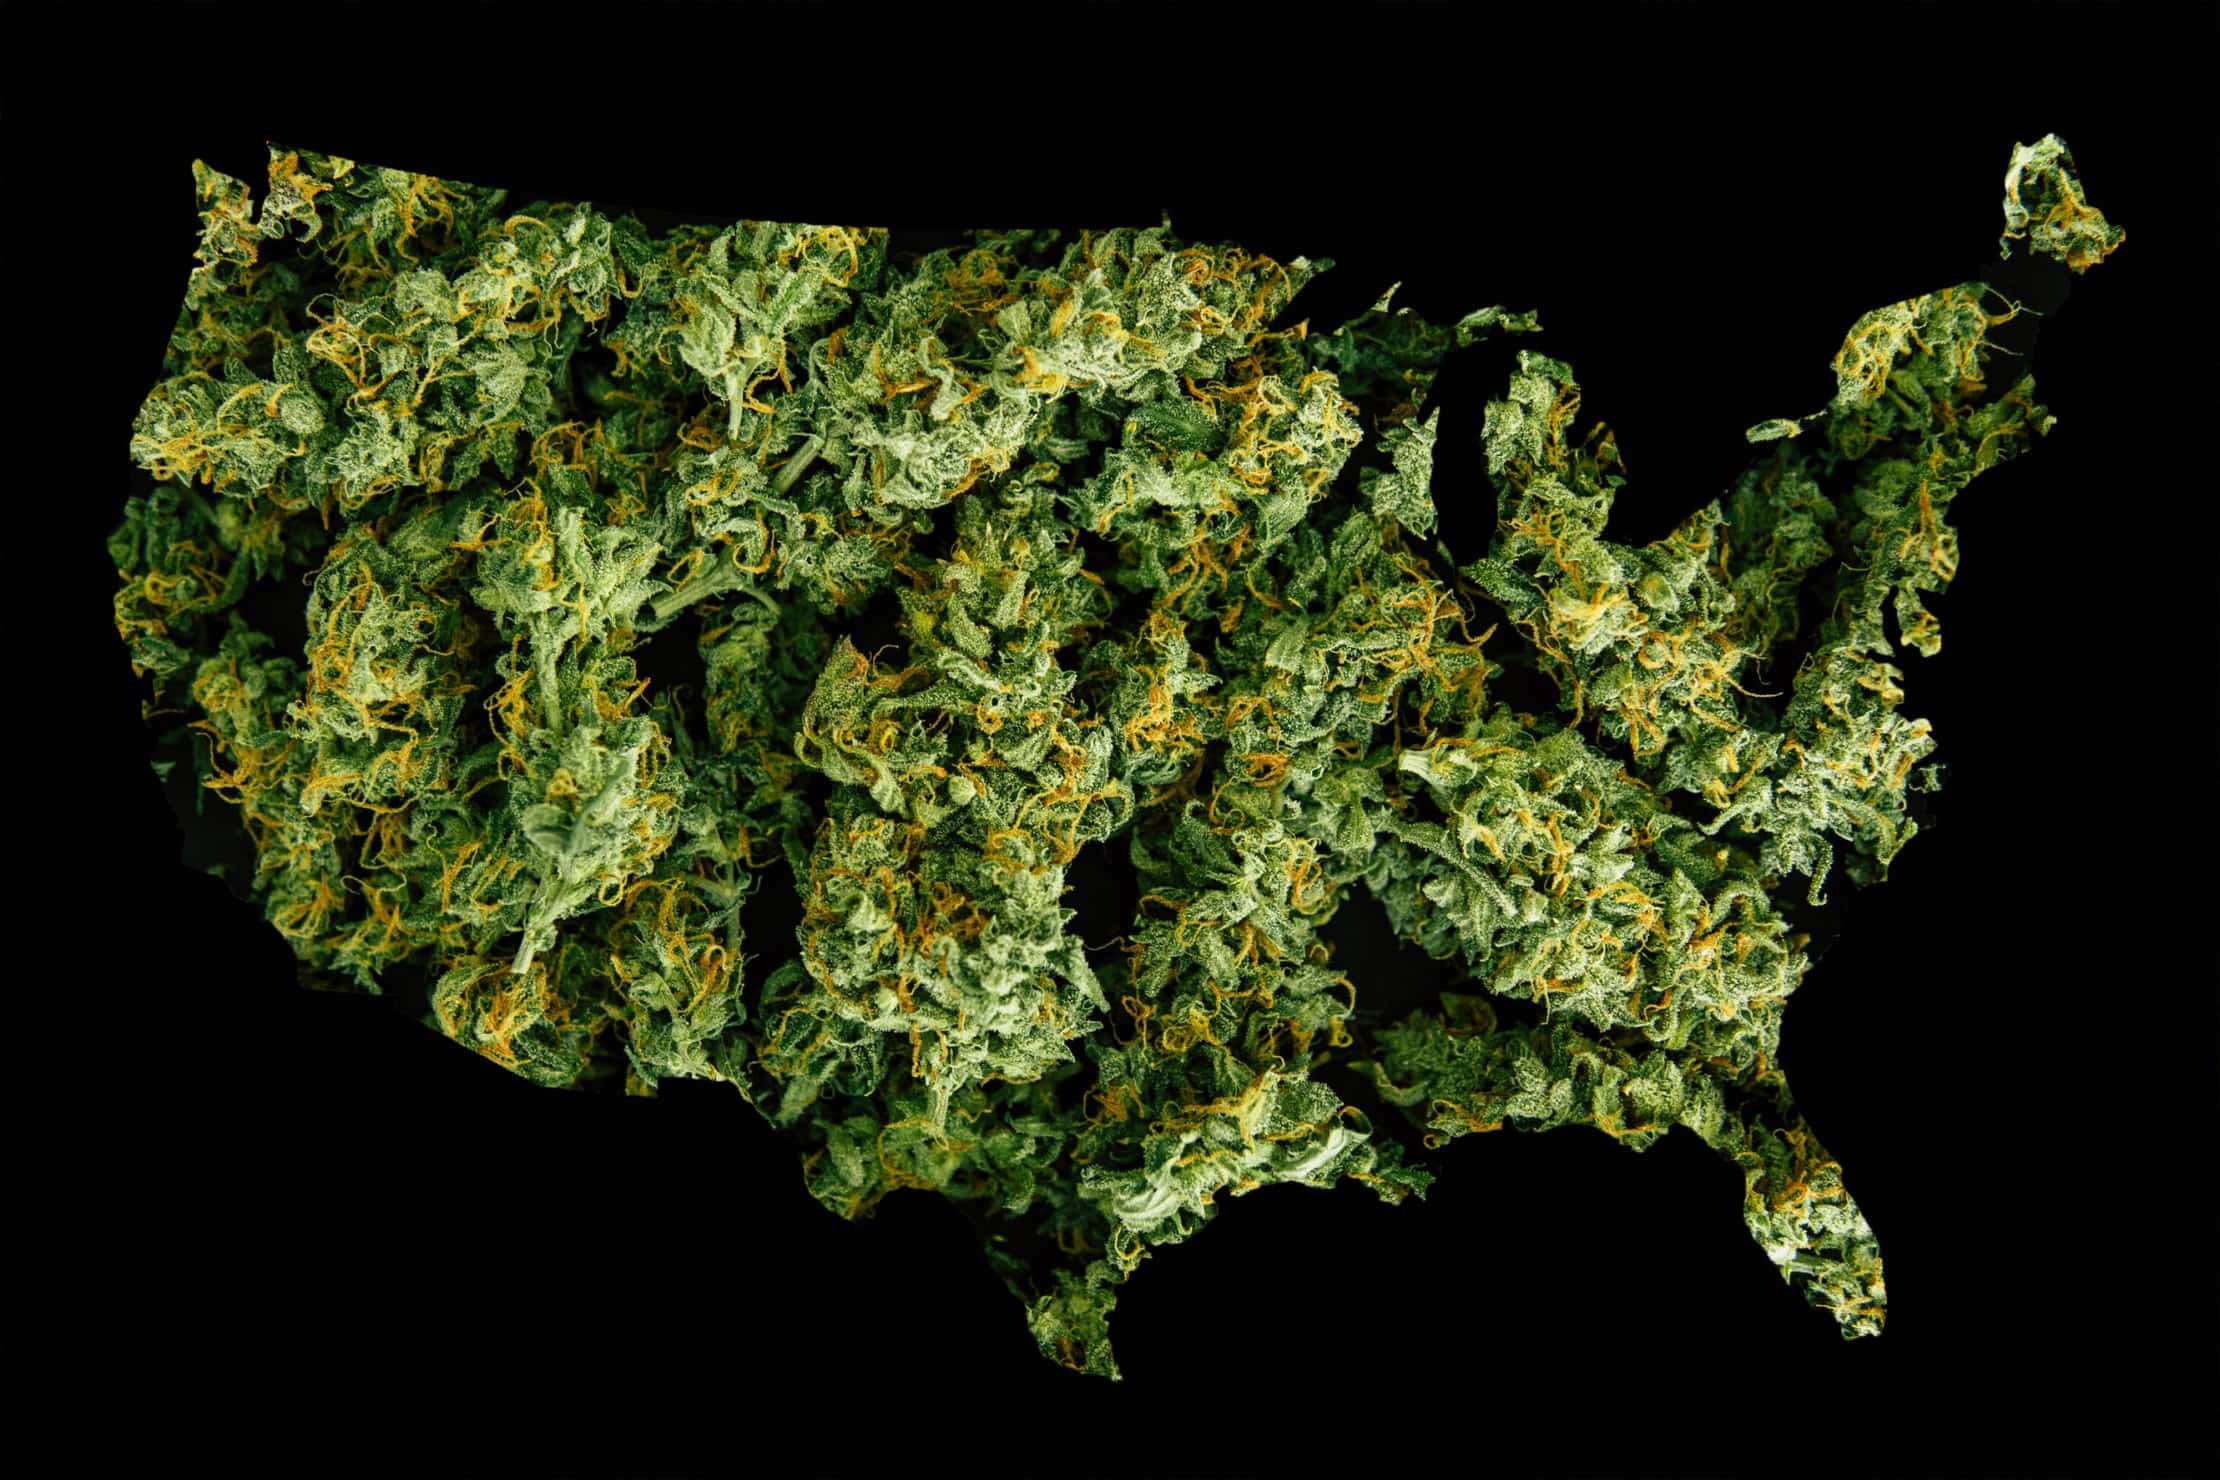 91 Percent of Americans Support Cannabis Legalization